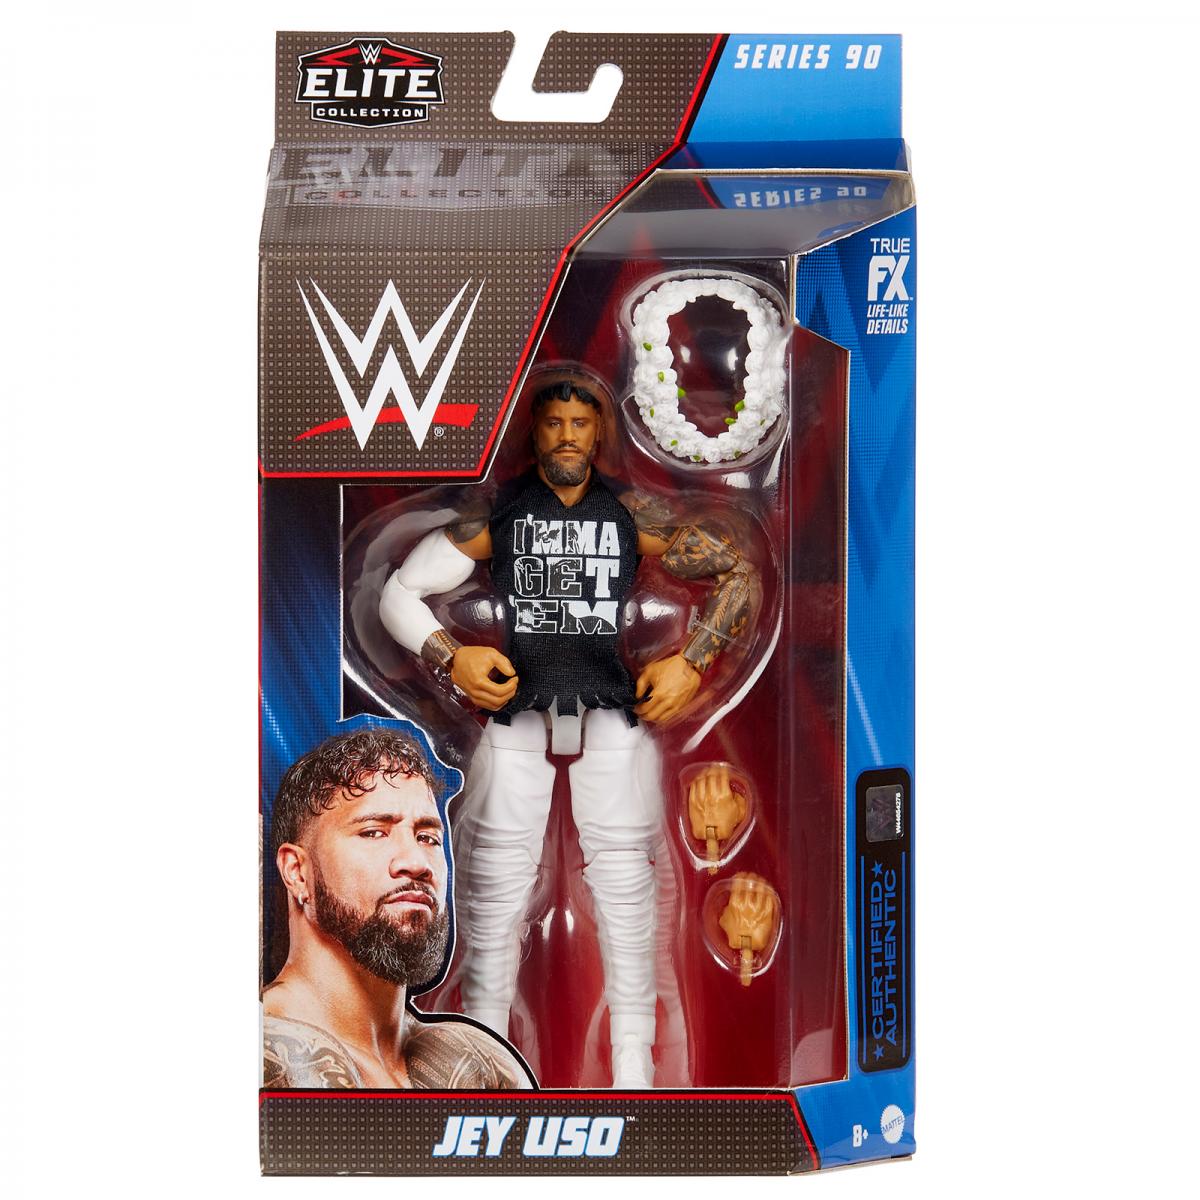 WWE Mattel Elite Collection Series 90 Jey Uso